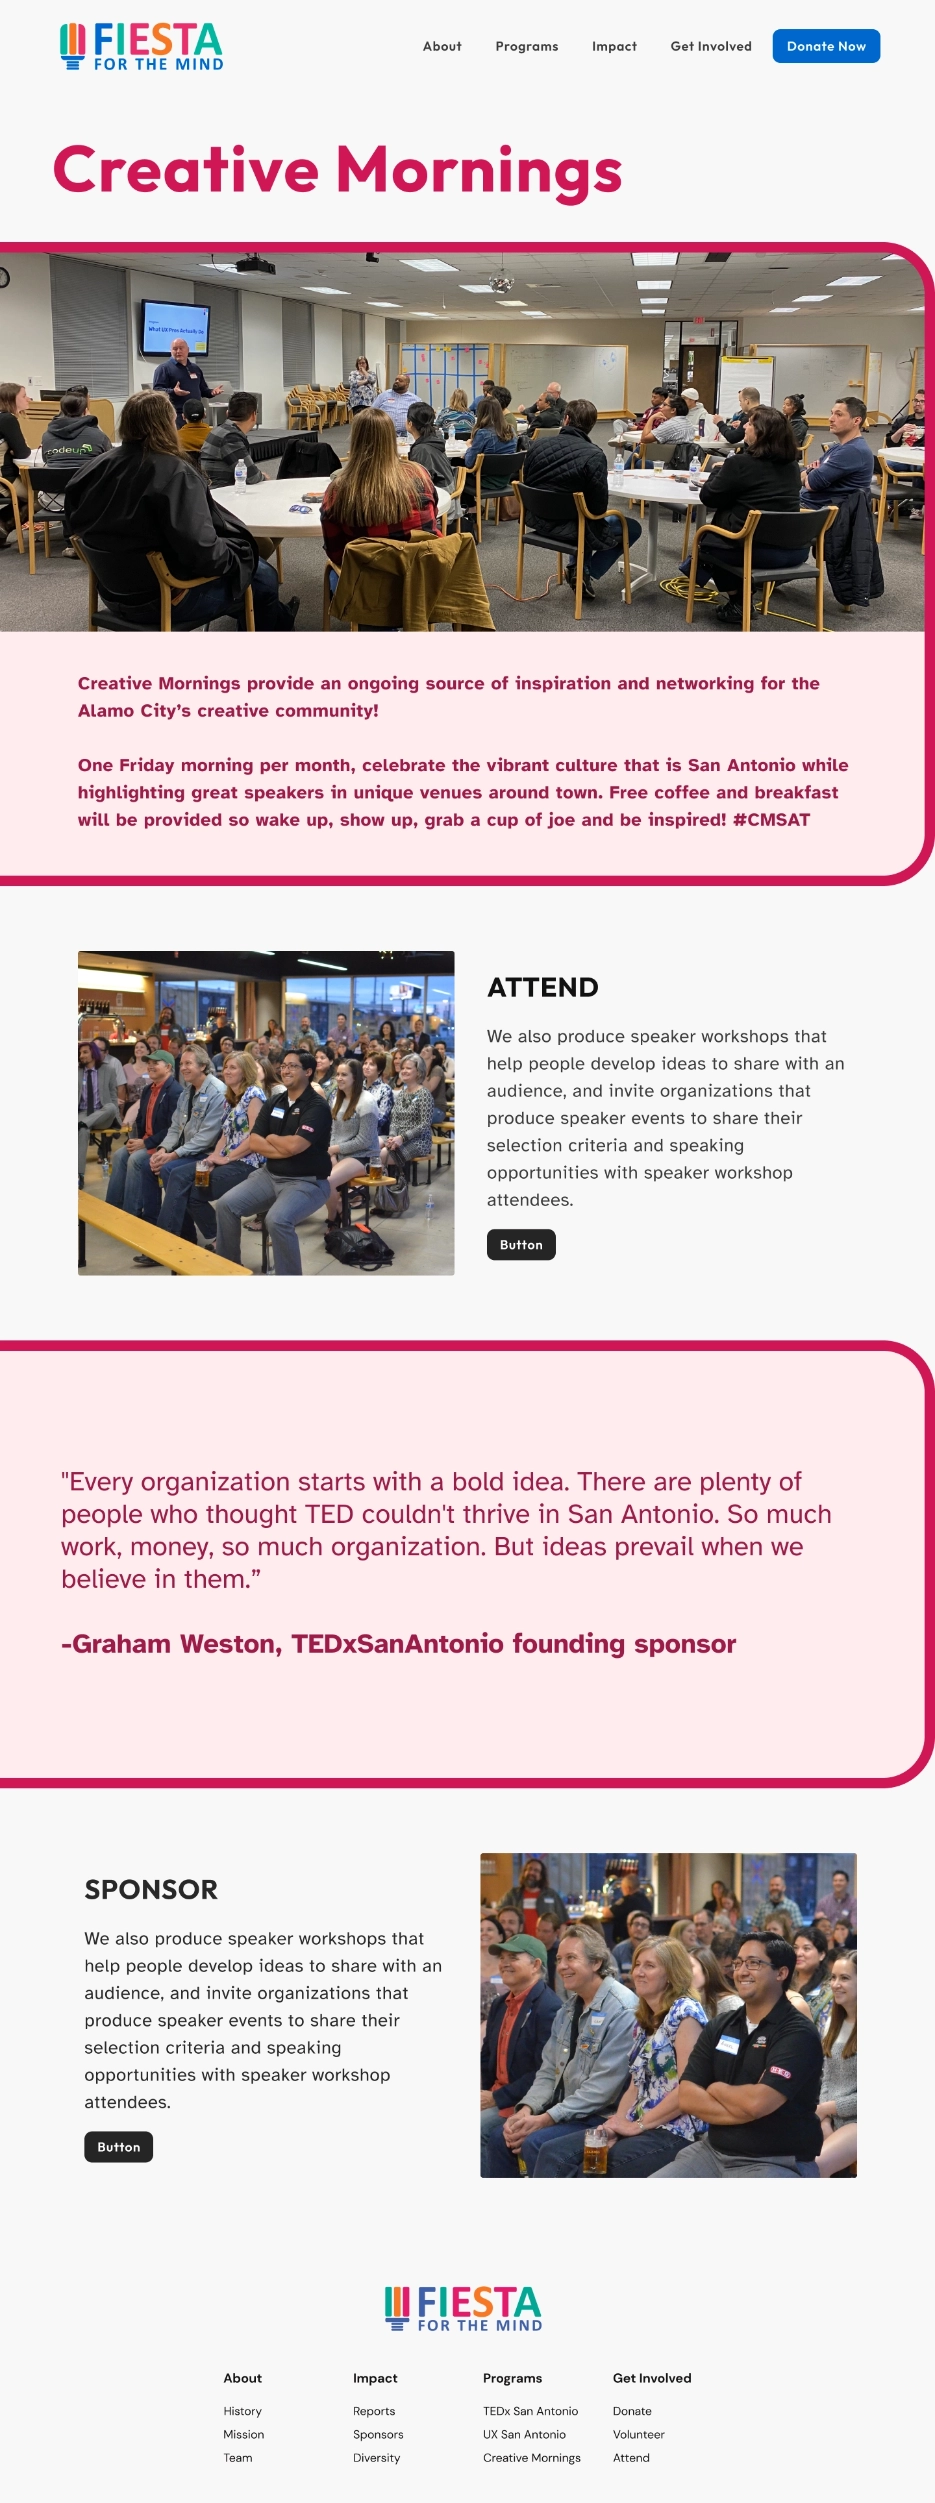 Creative Mornings page mockup, with a hero section describing the event along with details on how to attend or to sponsor.